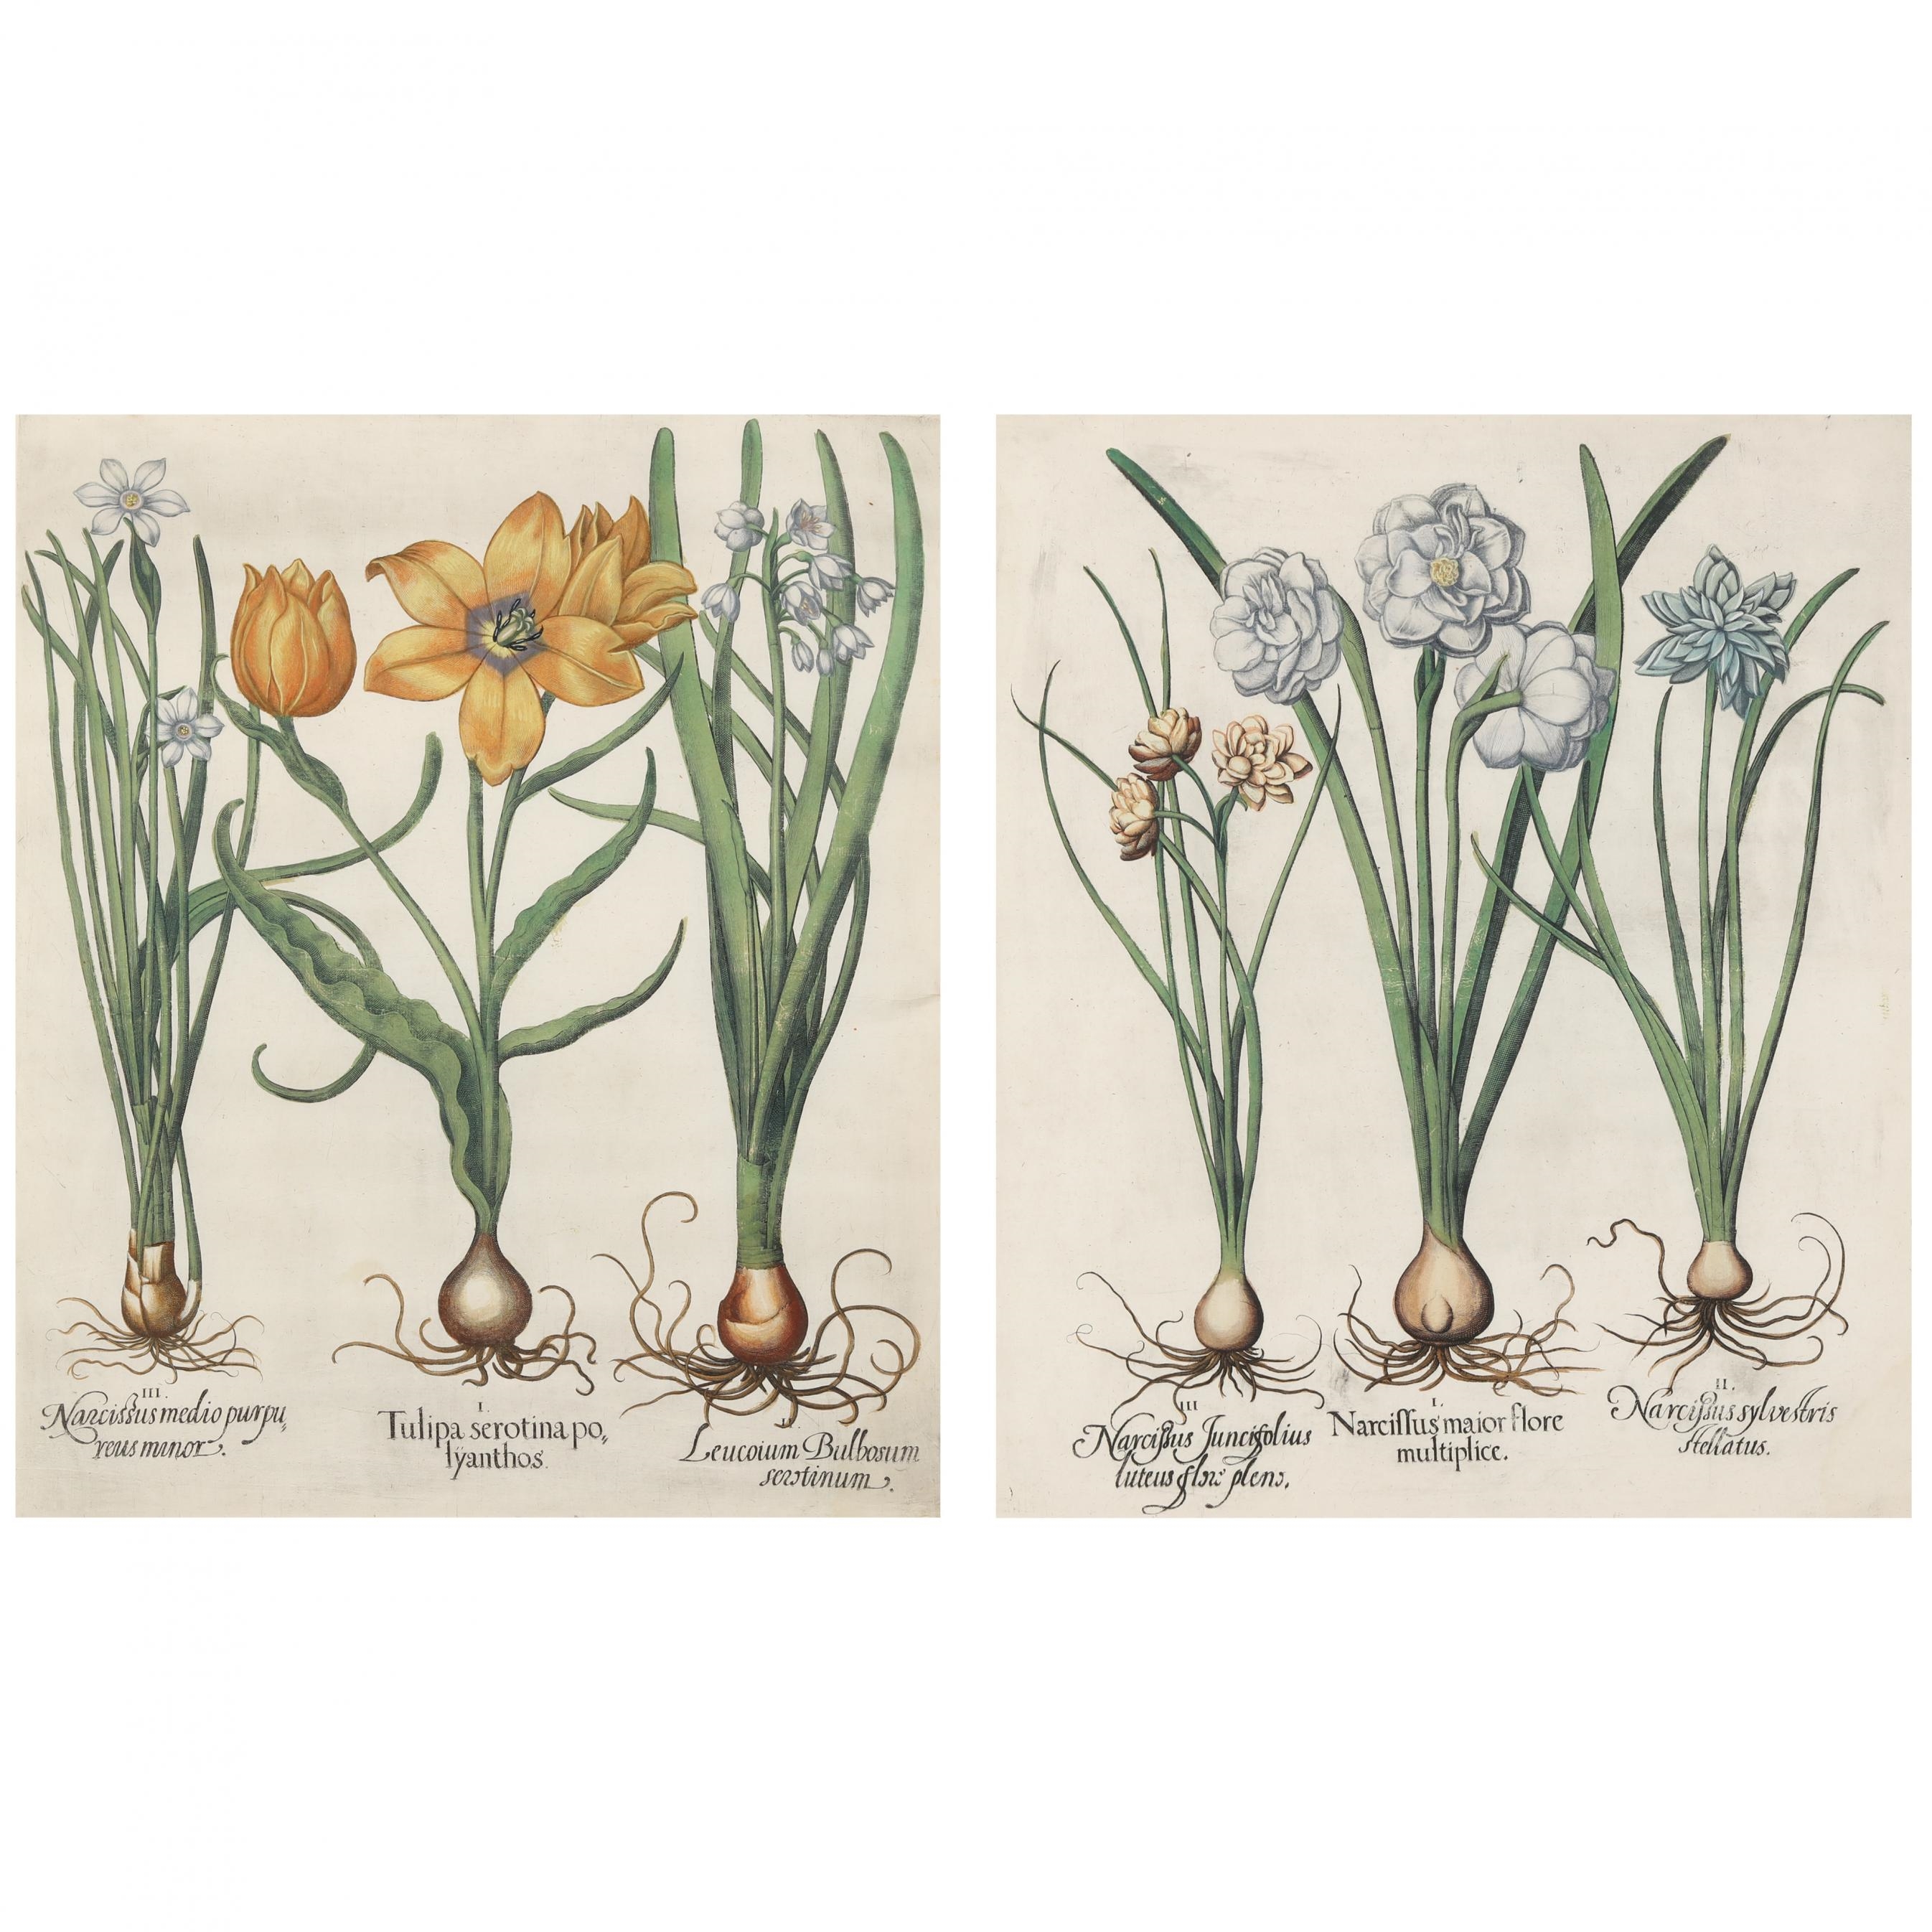 Two Botanical Illustrations from Hortus Eystettensis by Basilius Besler, 17th century